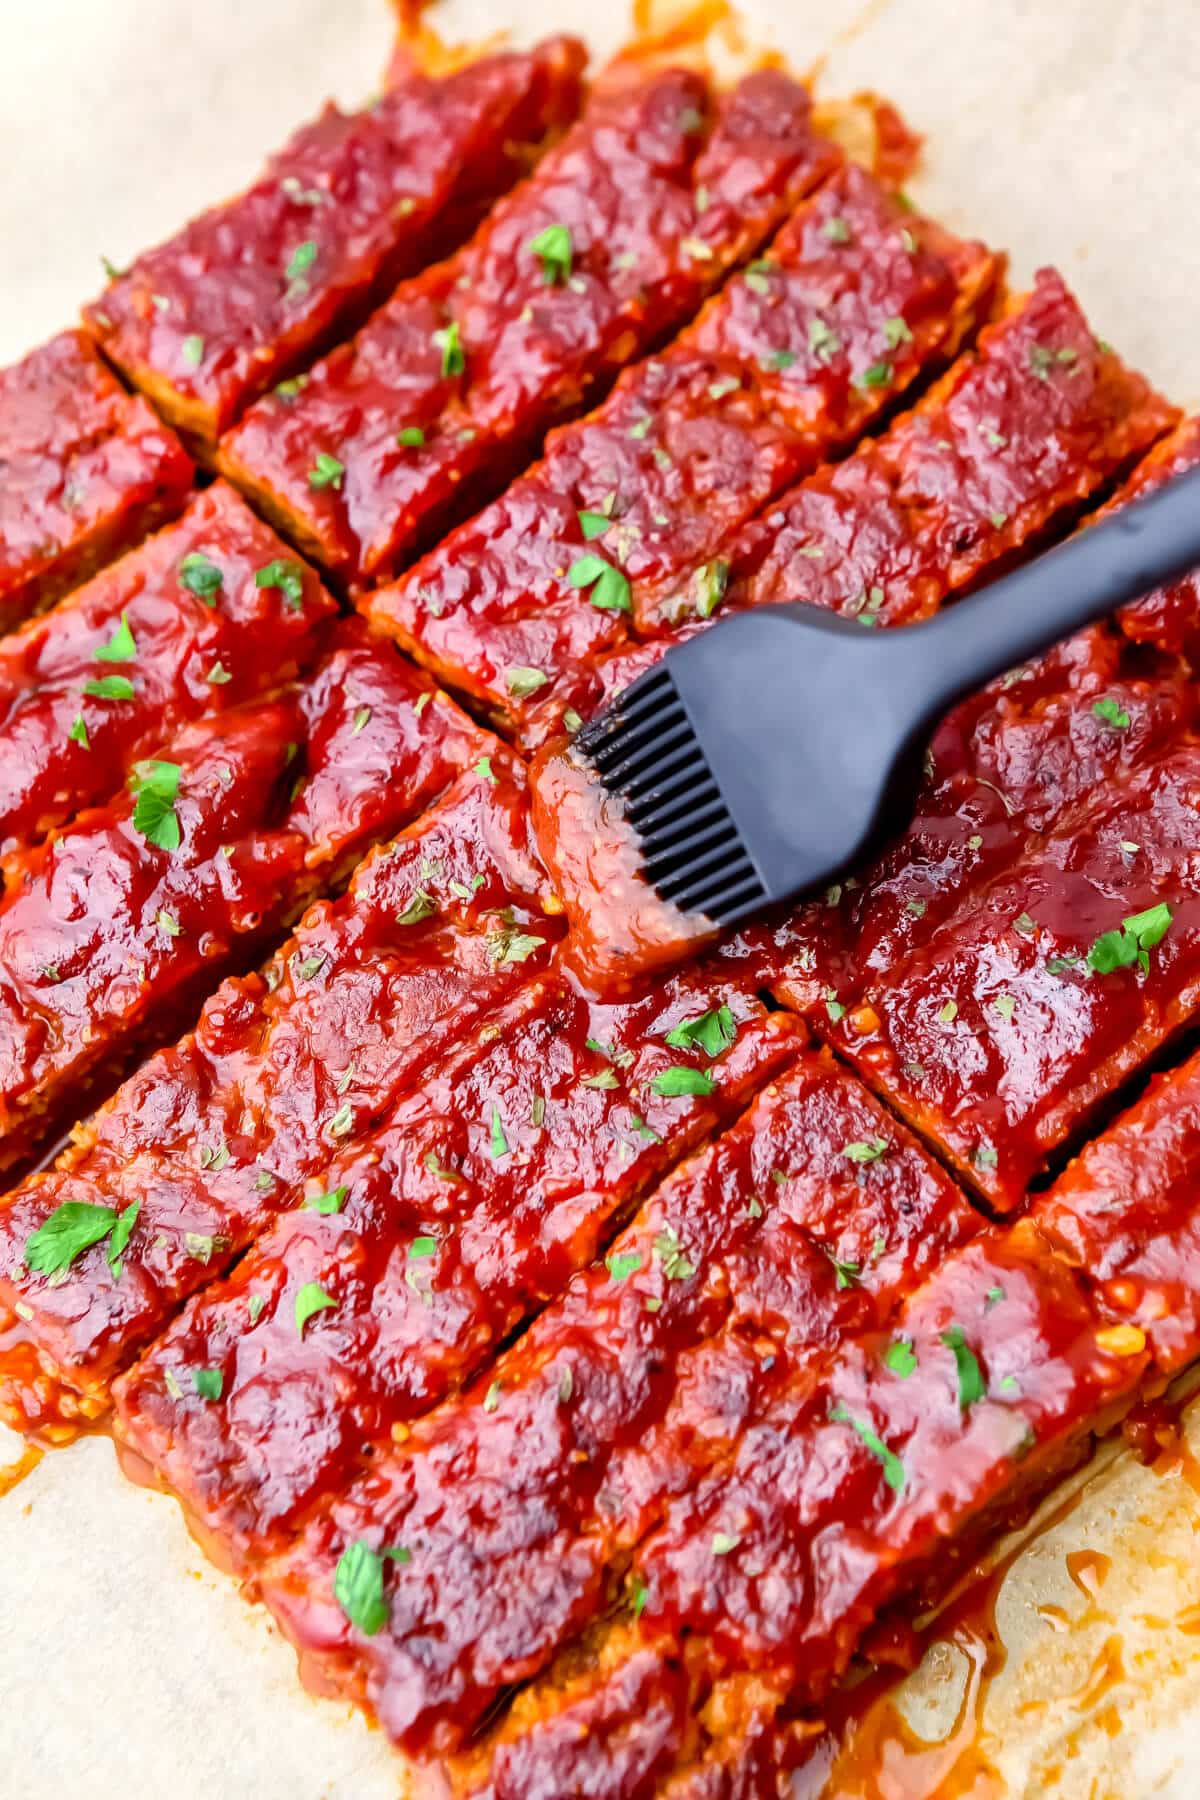 Vegan BBQ ribs with BBQ sauce being brushed on them.